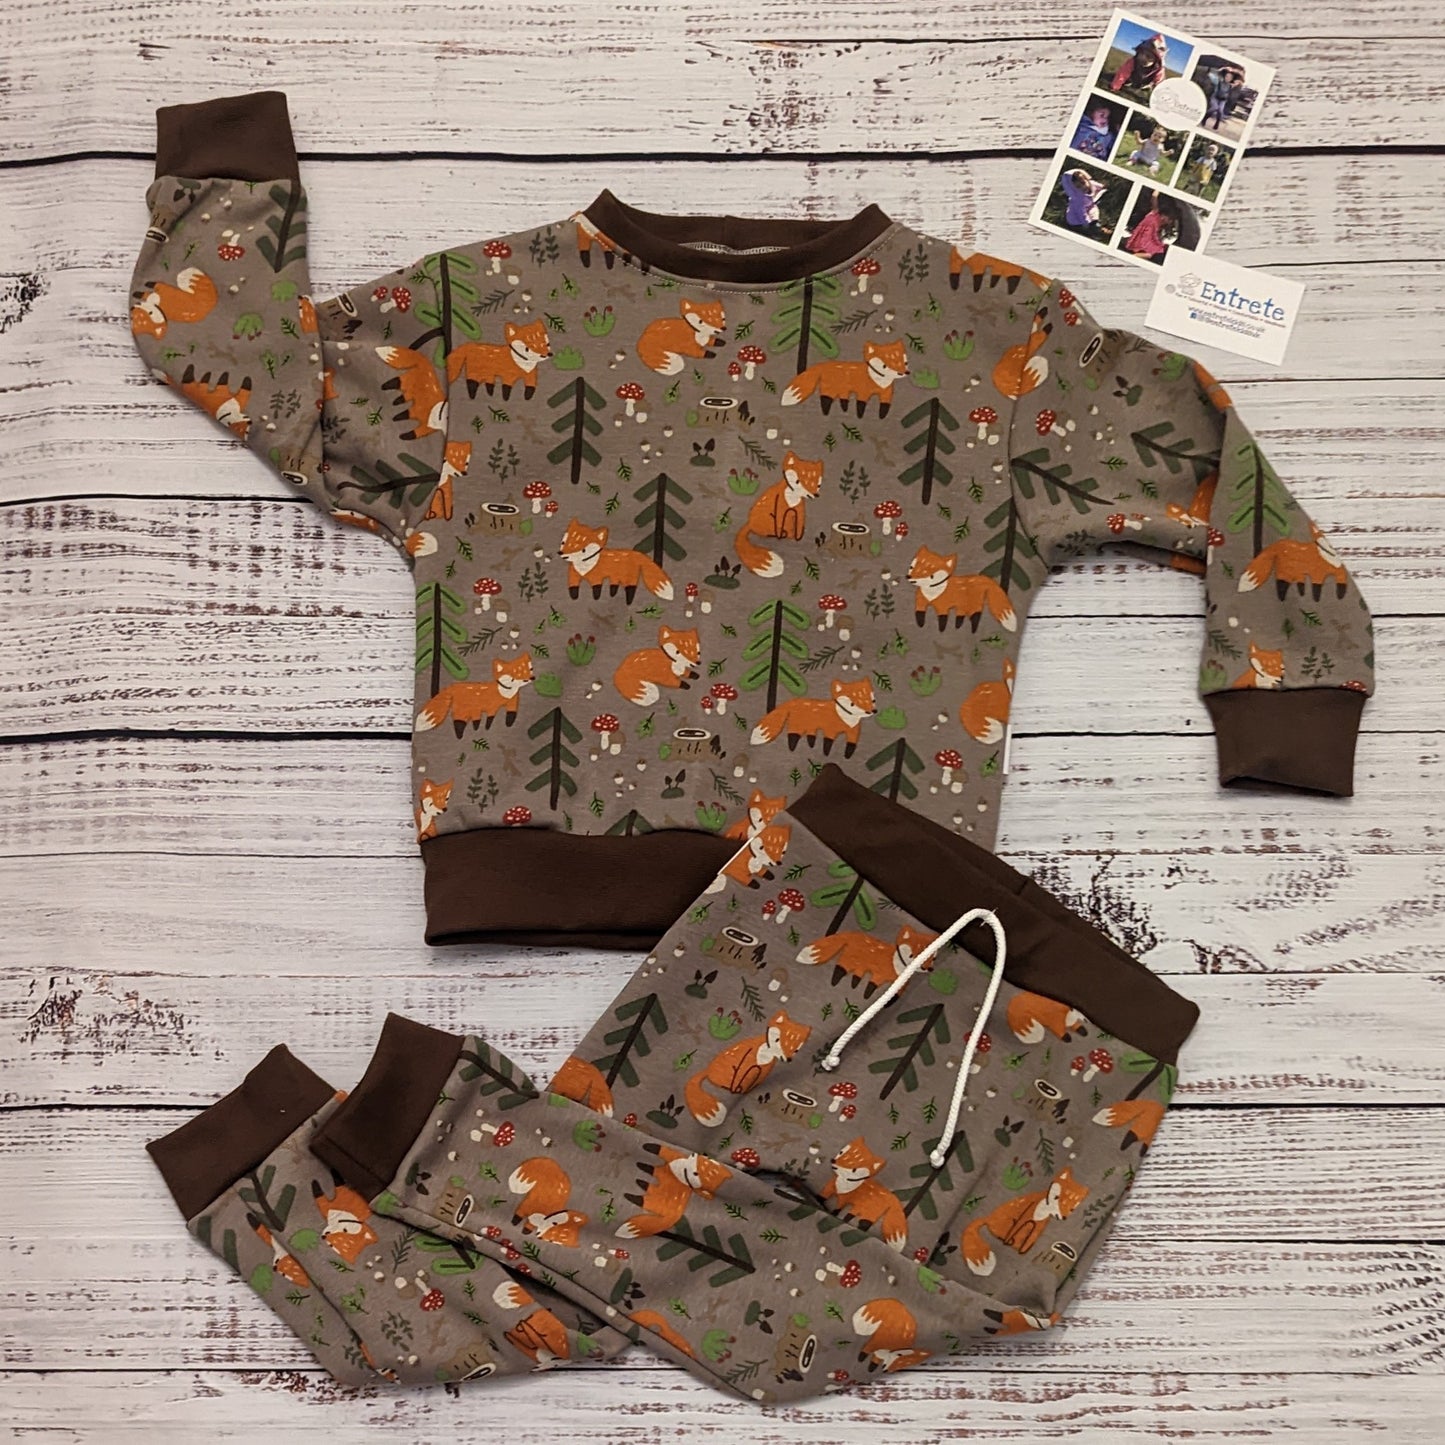 The warm, sumptuously soft and fun forest foxes sweatshirt. Handmade using brown forest foxes alpine fleece and brown cotton ribbing. Shown as an outfit with matching forest foxes harem joggers.